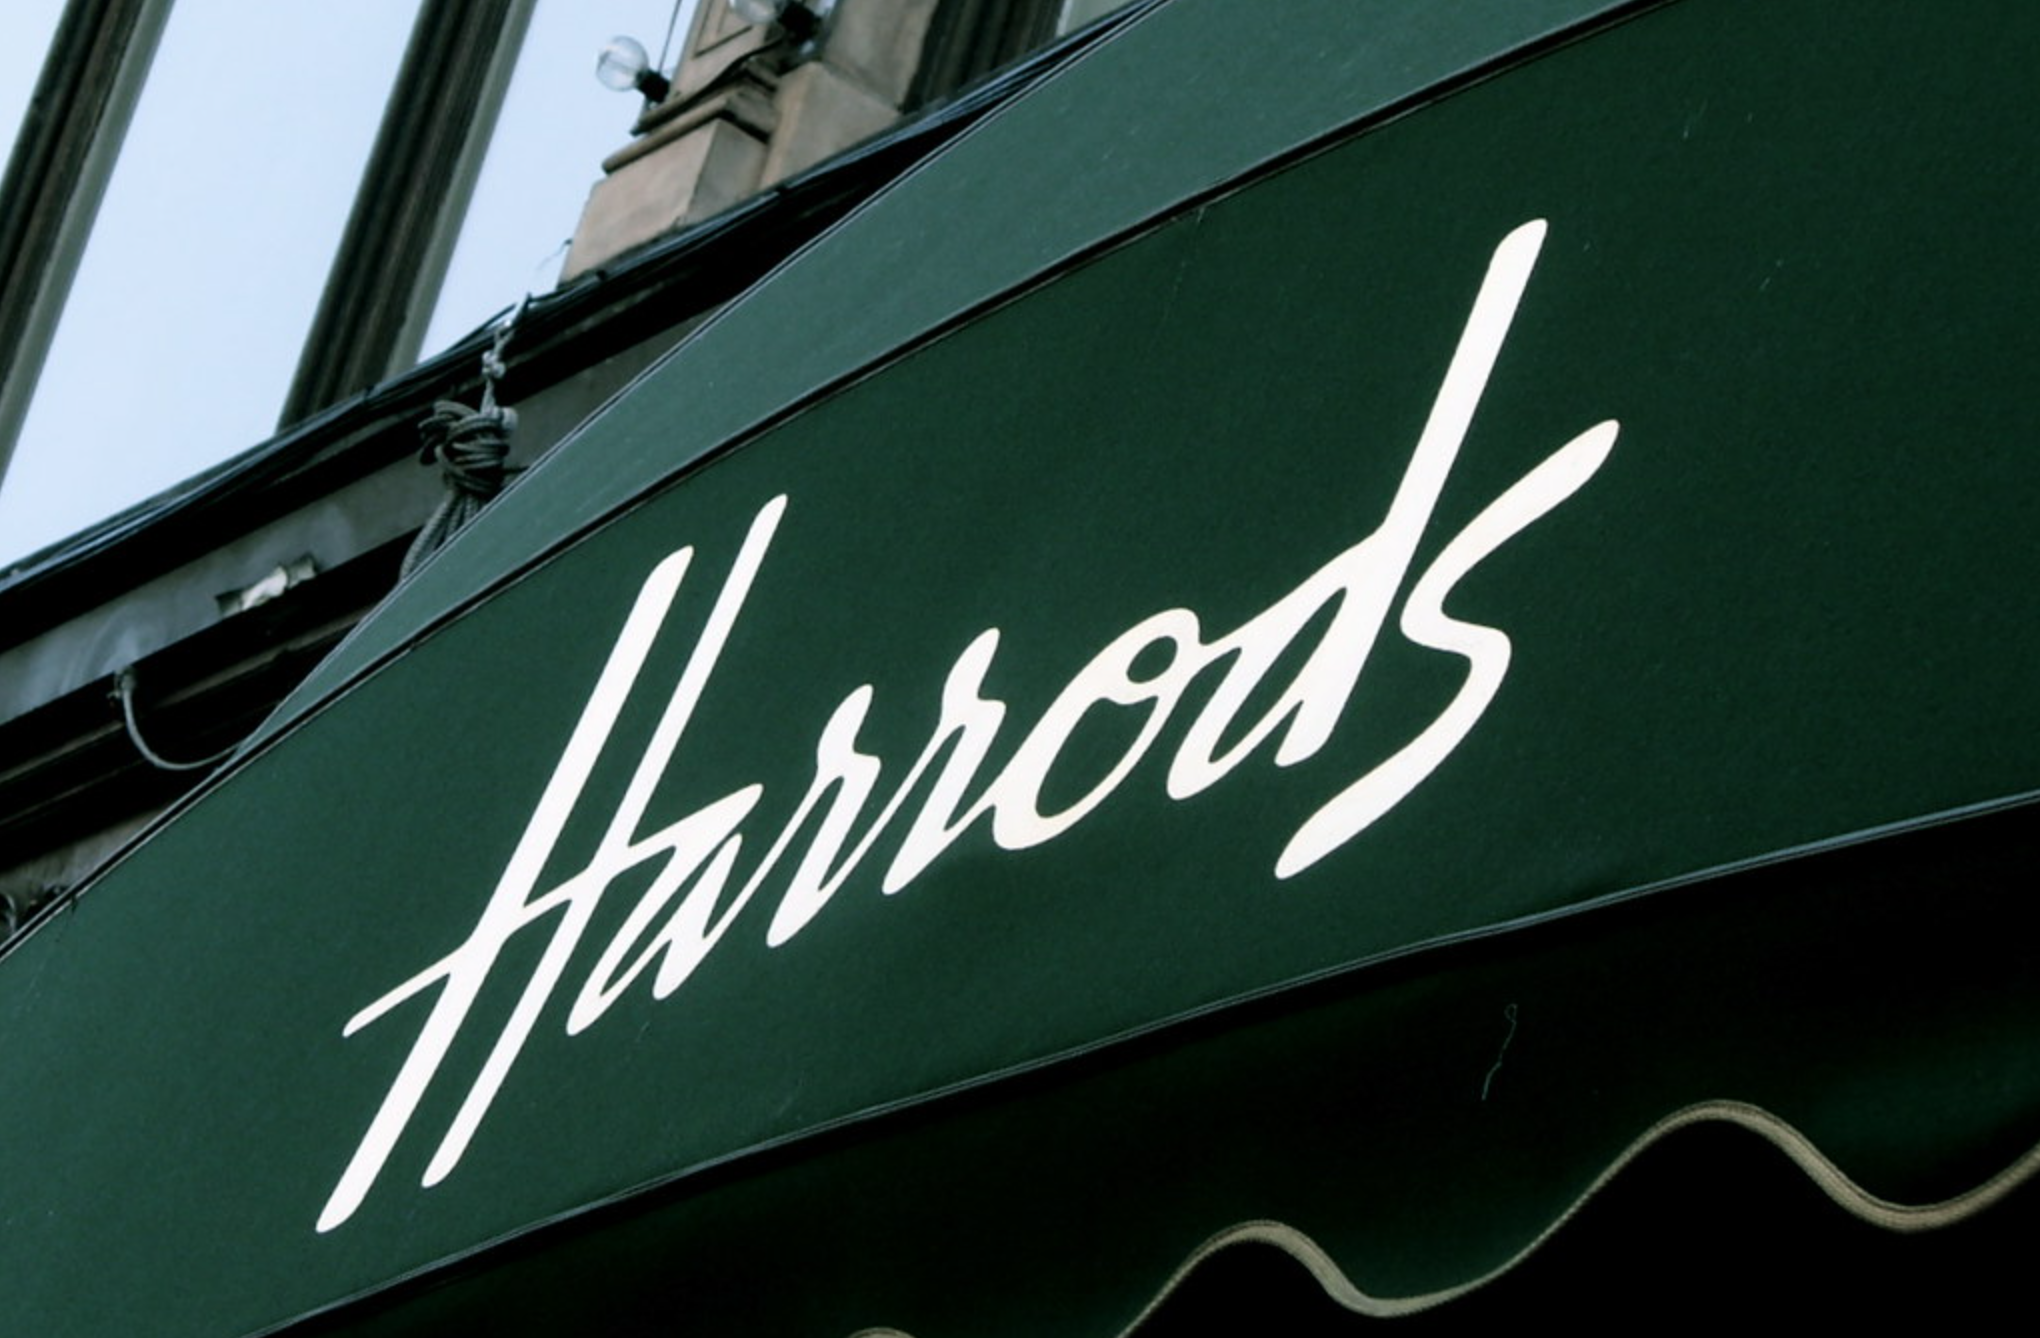 Harrods London credit Manel CC BY ND 2 0